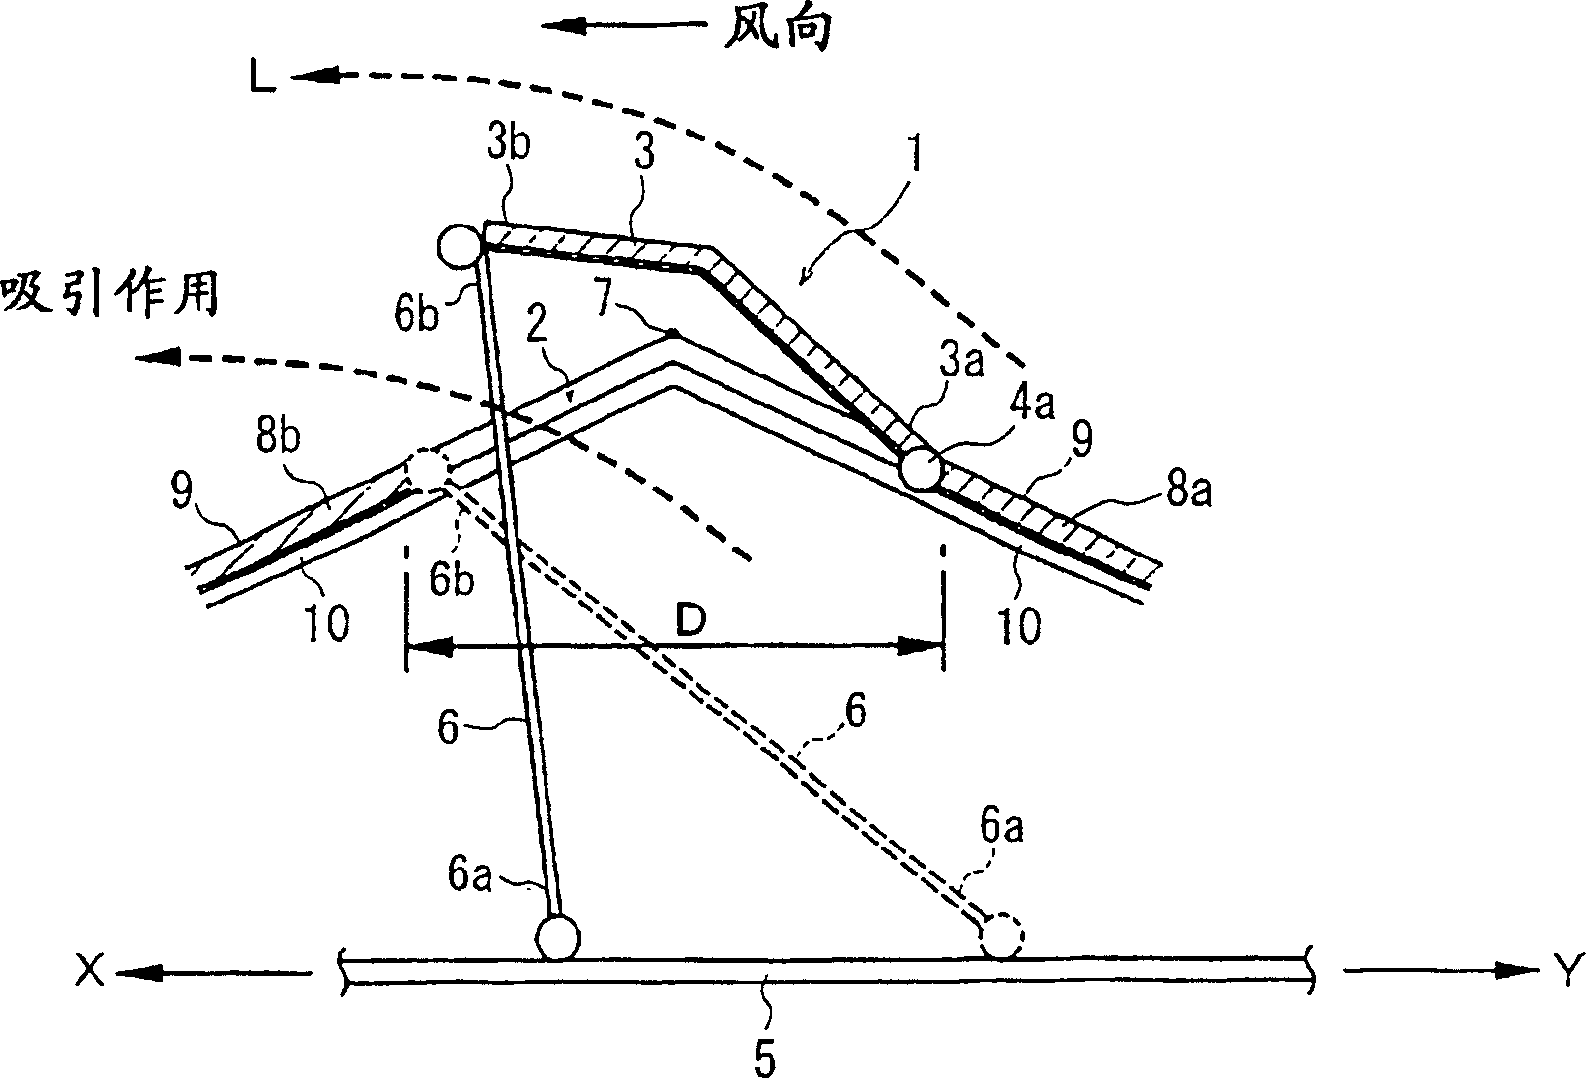 Structure of skylight in greenhouse